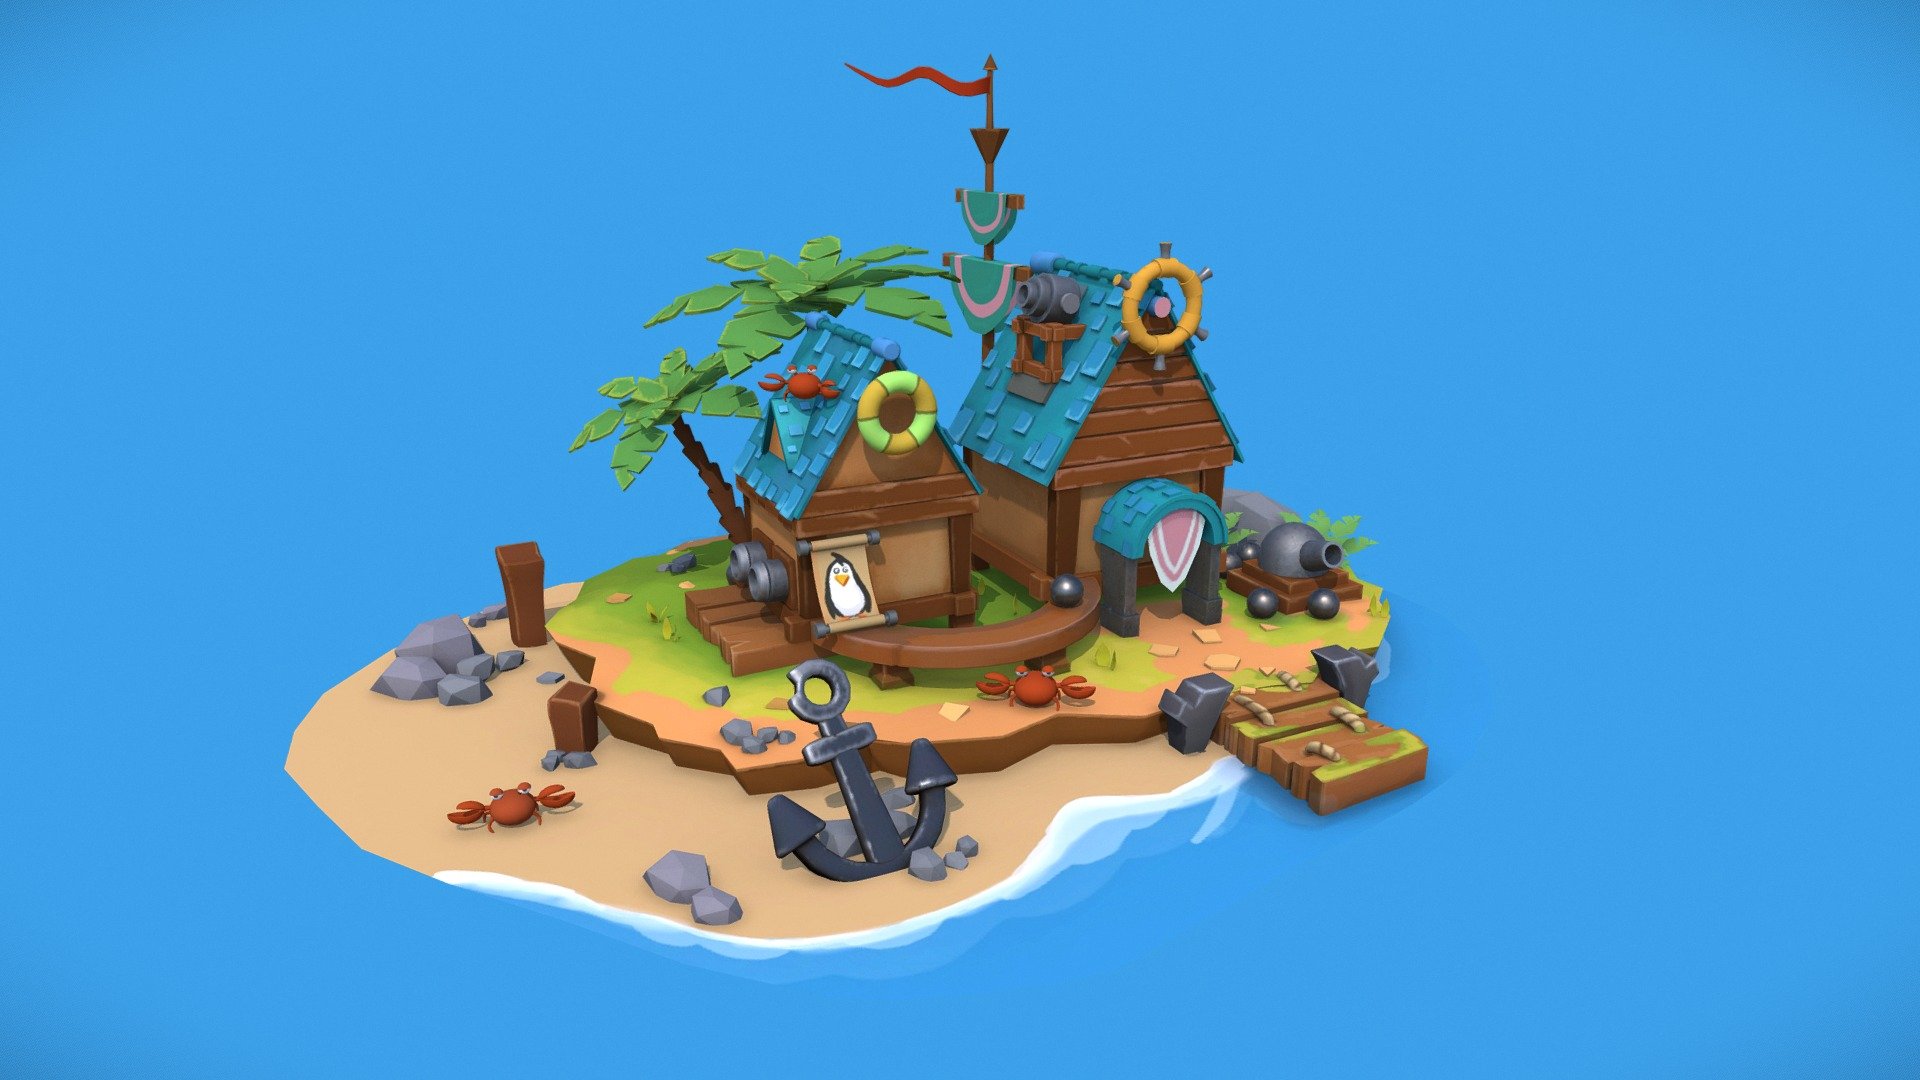 A small island in the ocean where the penguin lives. Together with the crabs, they ennobled him and protect him from the attacks of pirates.:) 

Concept by Martin GAO

Any feedback is appreciated 3d model